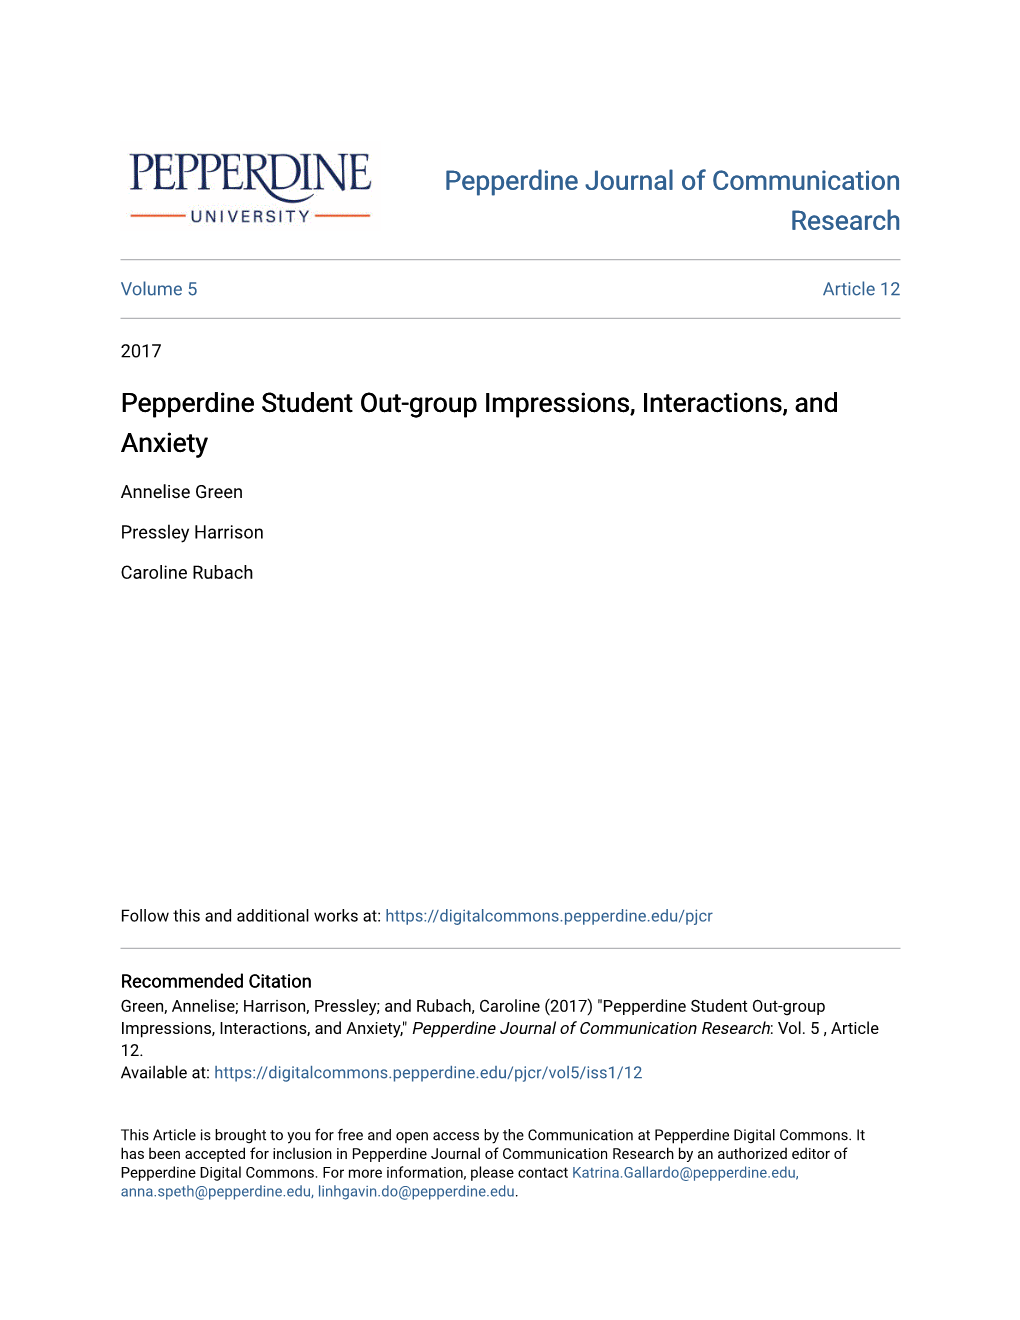 Pepperdine Student Out-Group Impressions, Interactions, and Anxiety